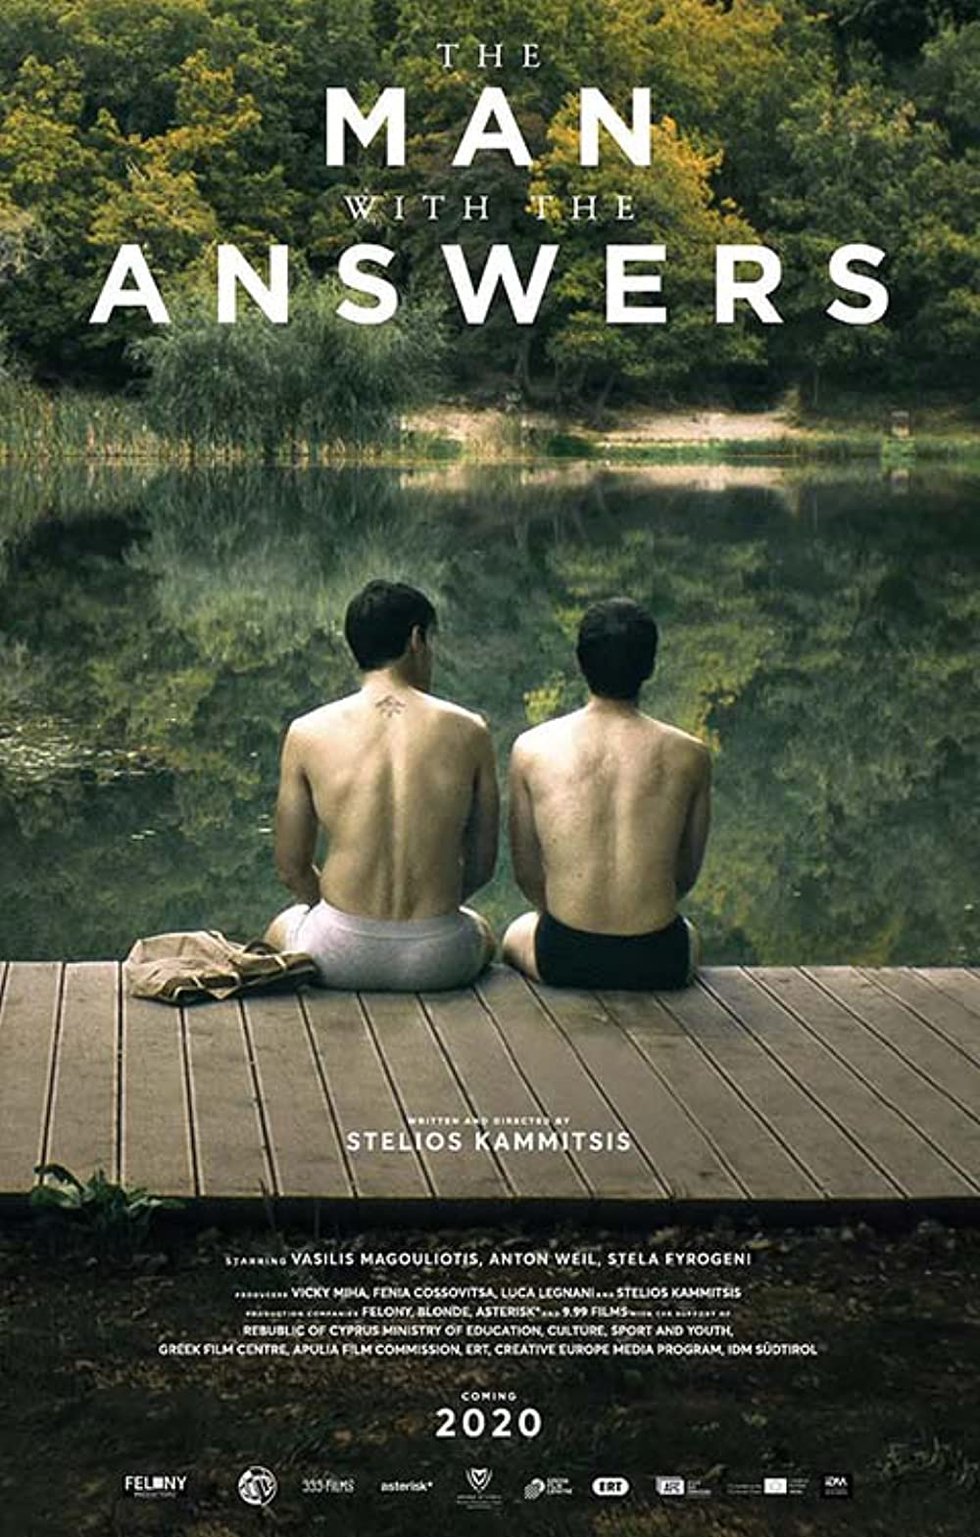 The Man with the Answers | Film Review